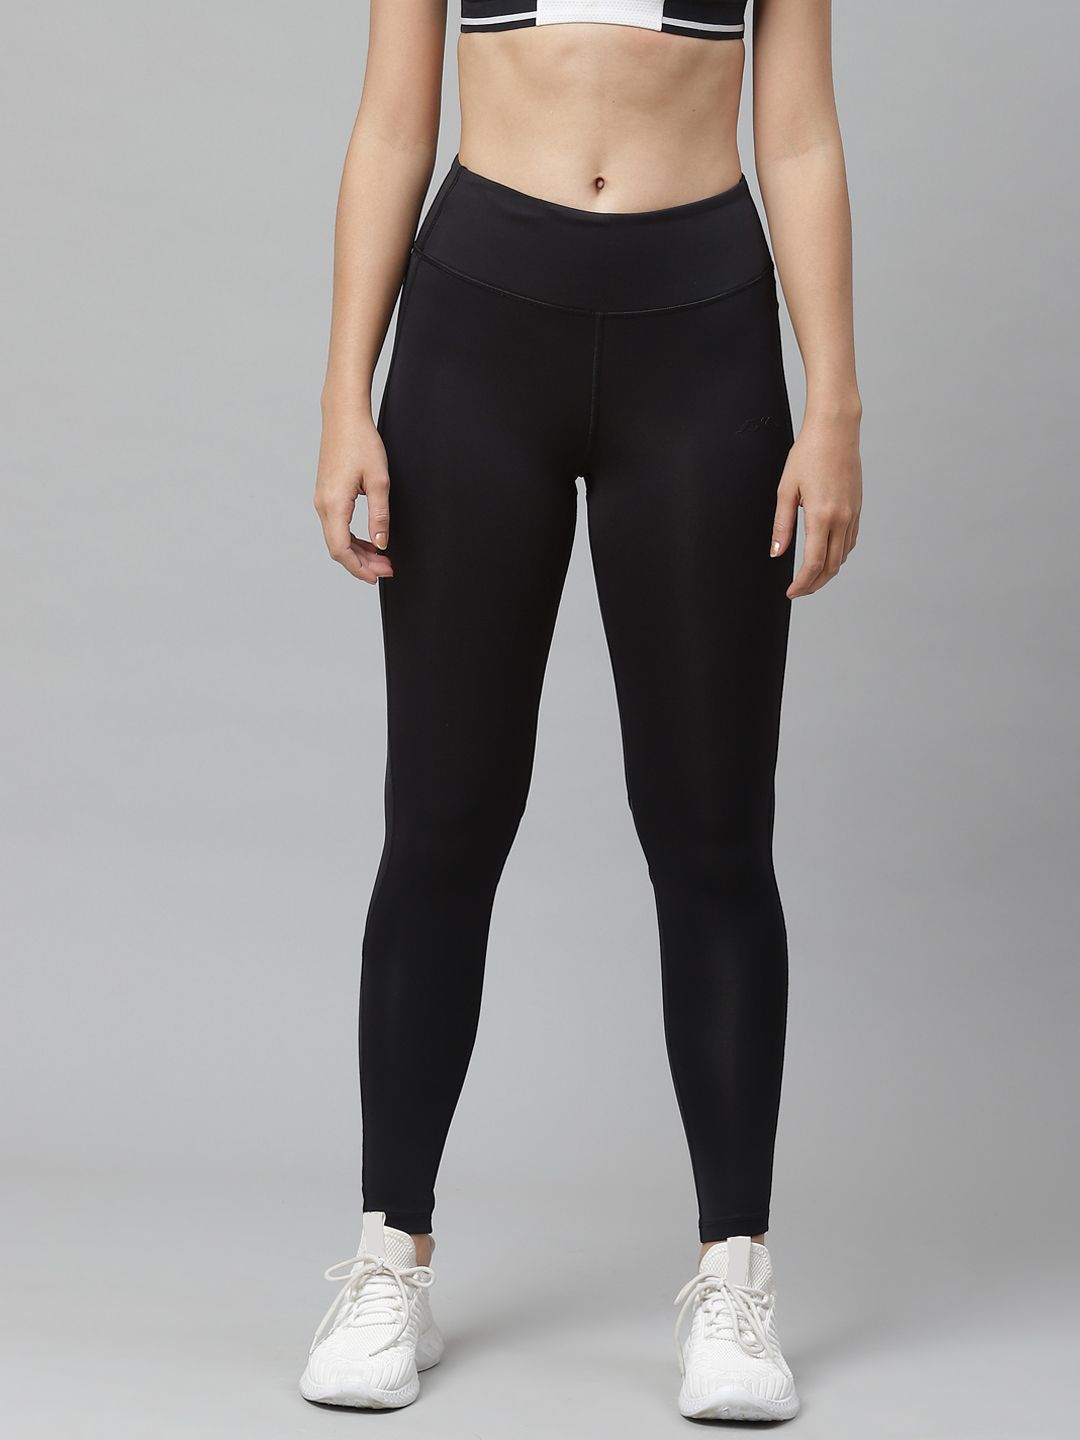 Alcis Nari Black Solid Sustainable Tights Price in India